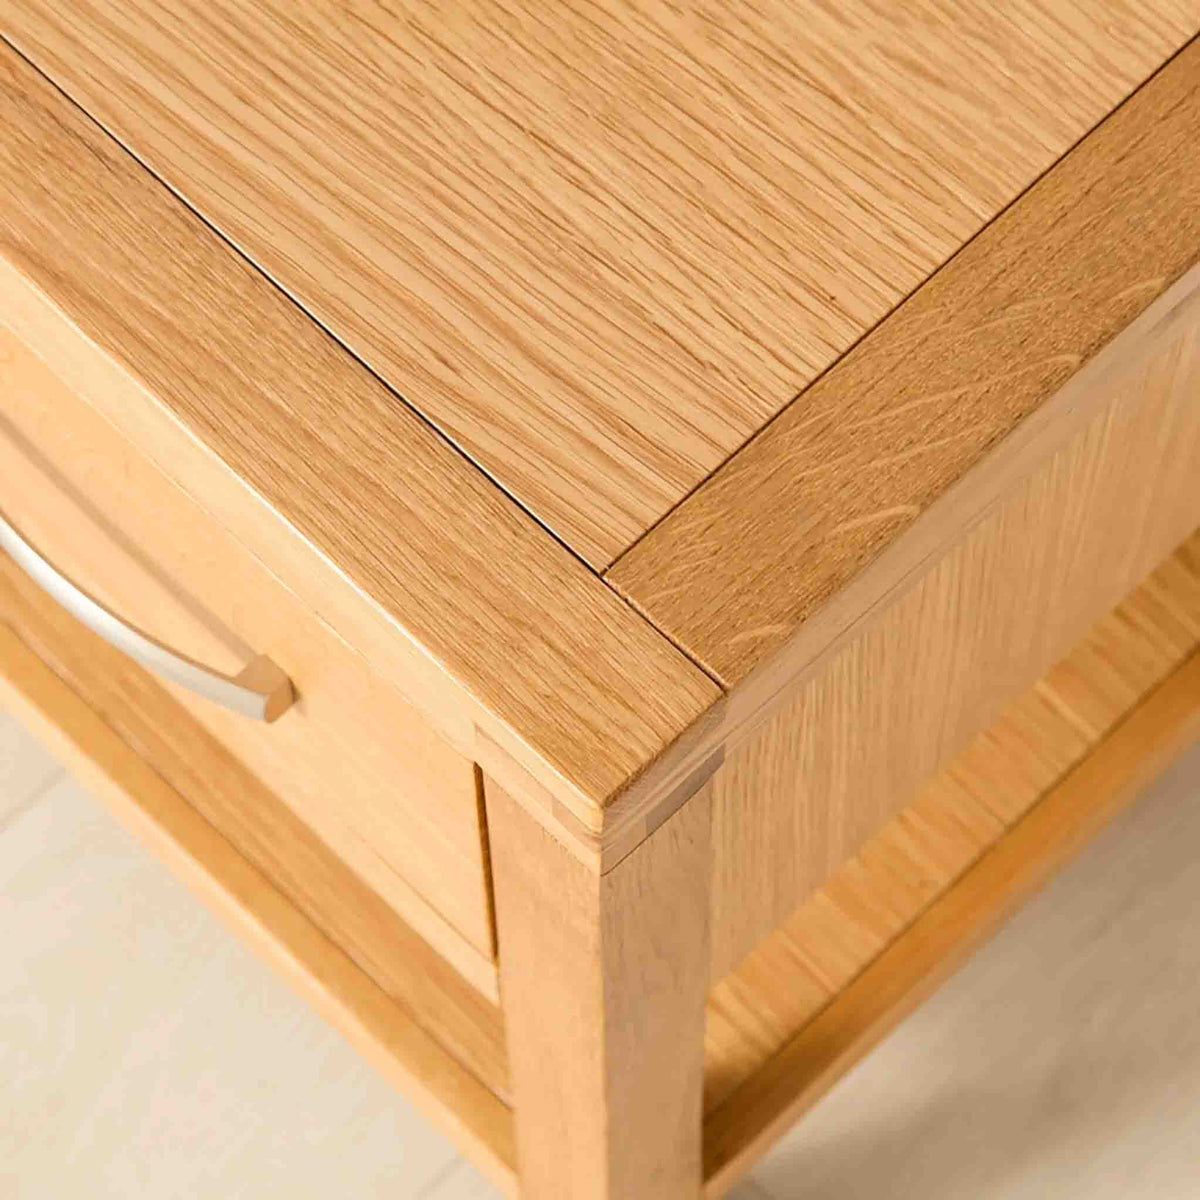 Top Corner view of the Abbey Light Oak Solid Wood Lamp Table by Roseland Furniture